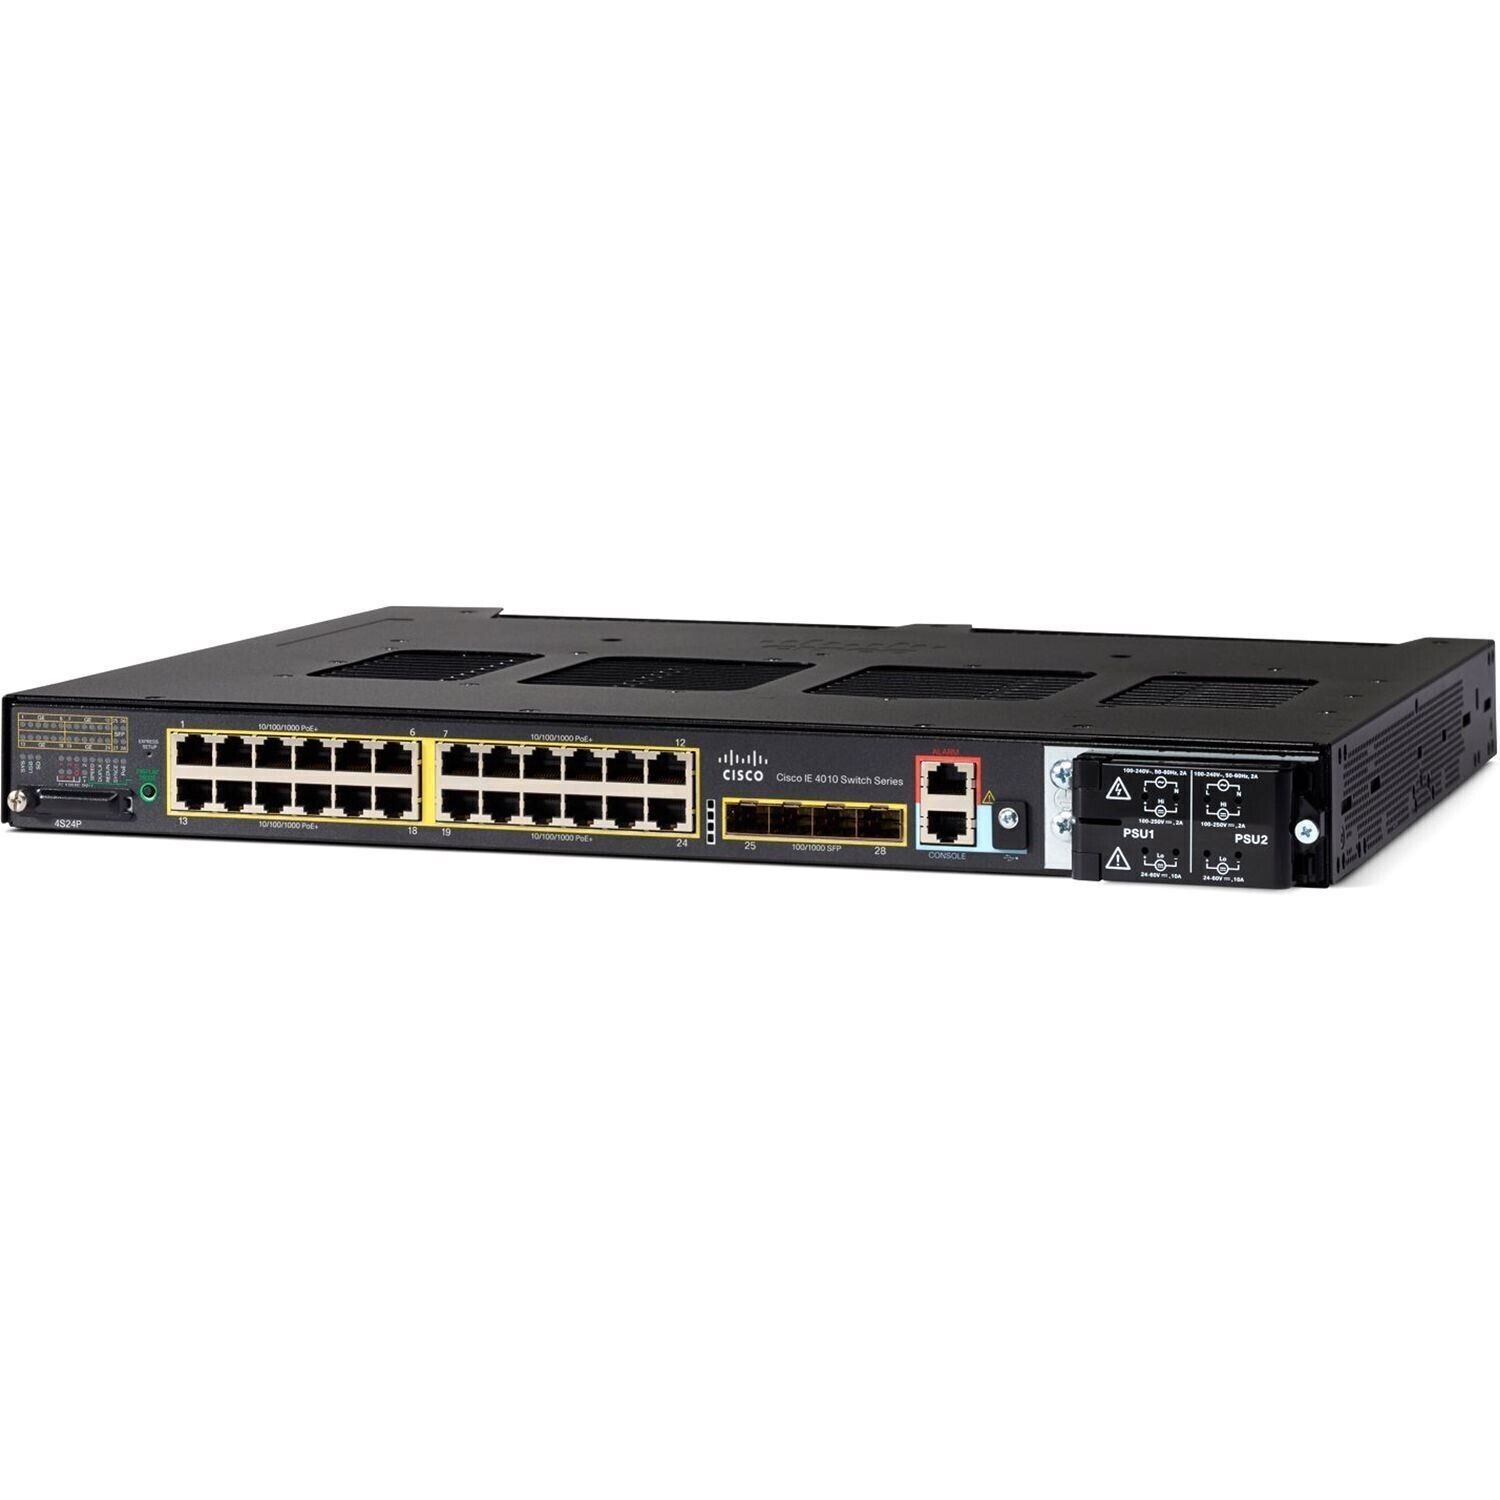 Cisco IE-4010-4S24P Industrial Ethernet Switch 24x 10/100/1000 PoE+ 4xSFP 2x PS